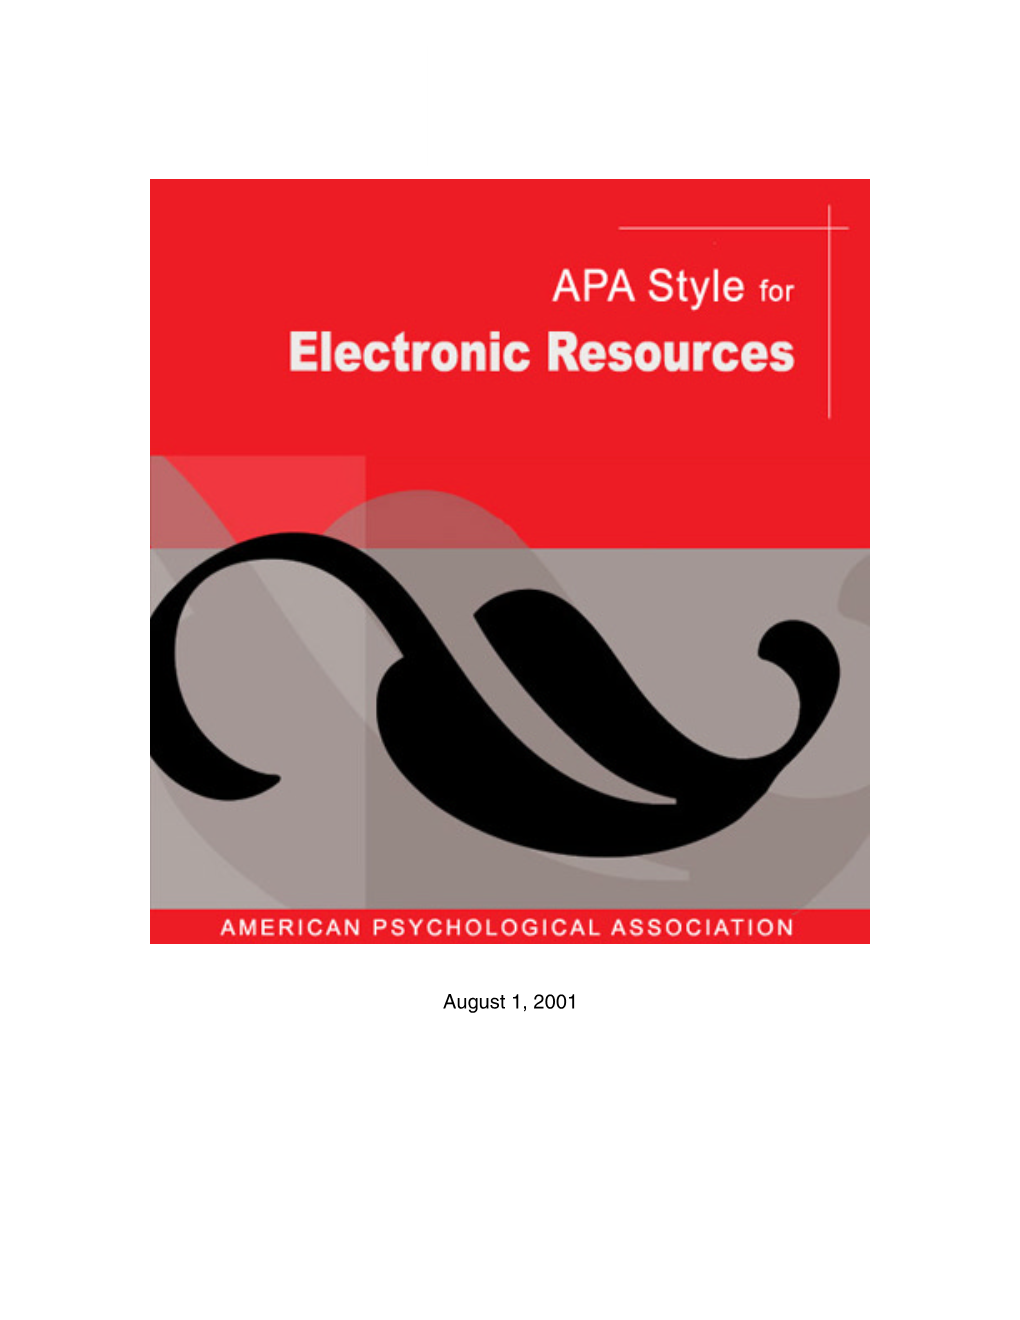 The APA Style Guide